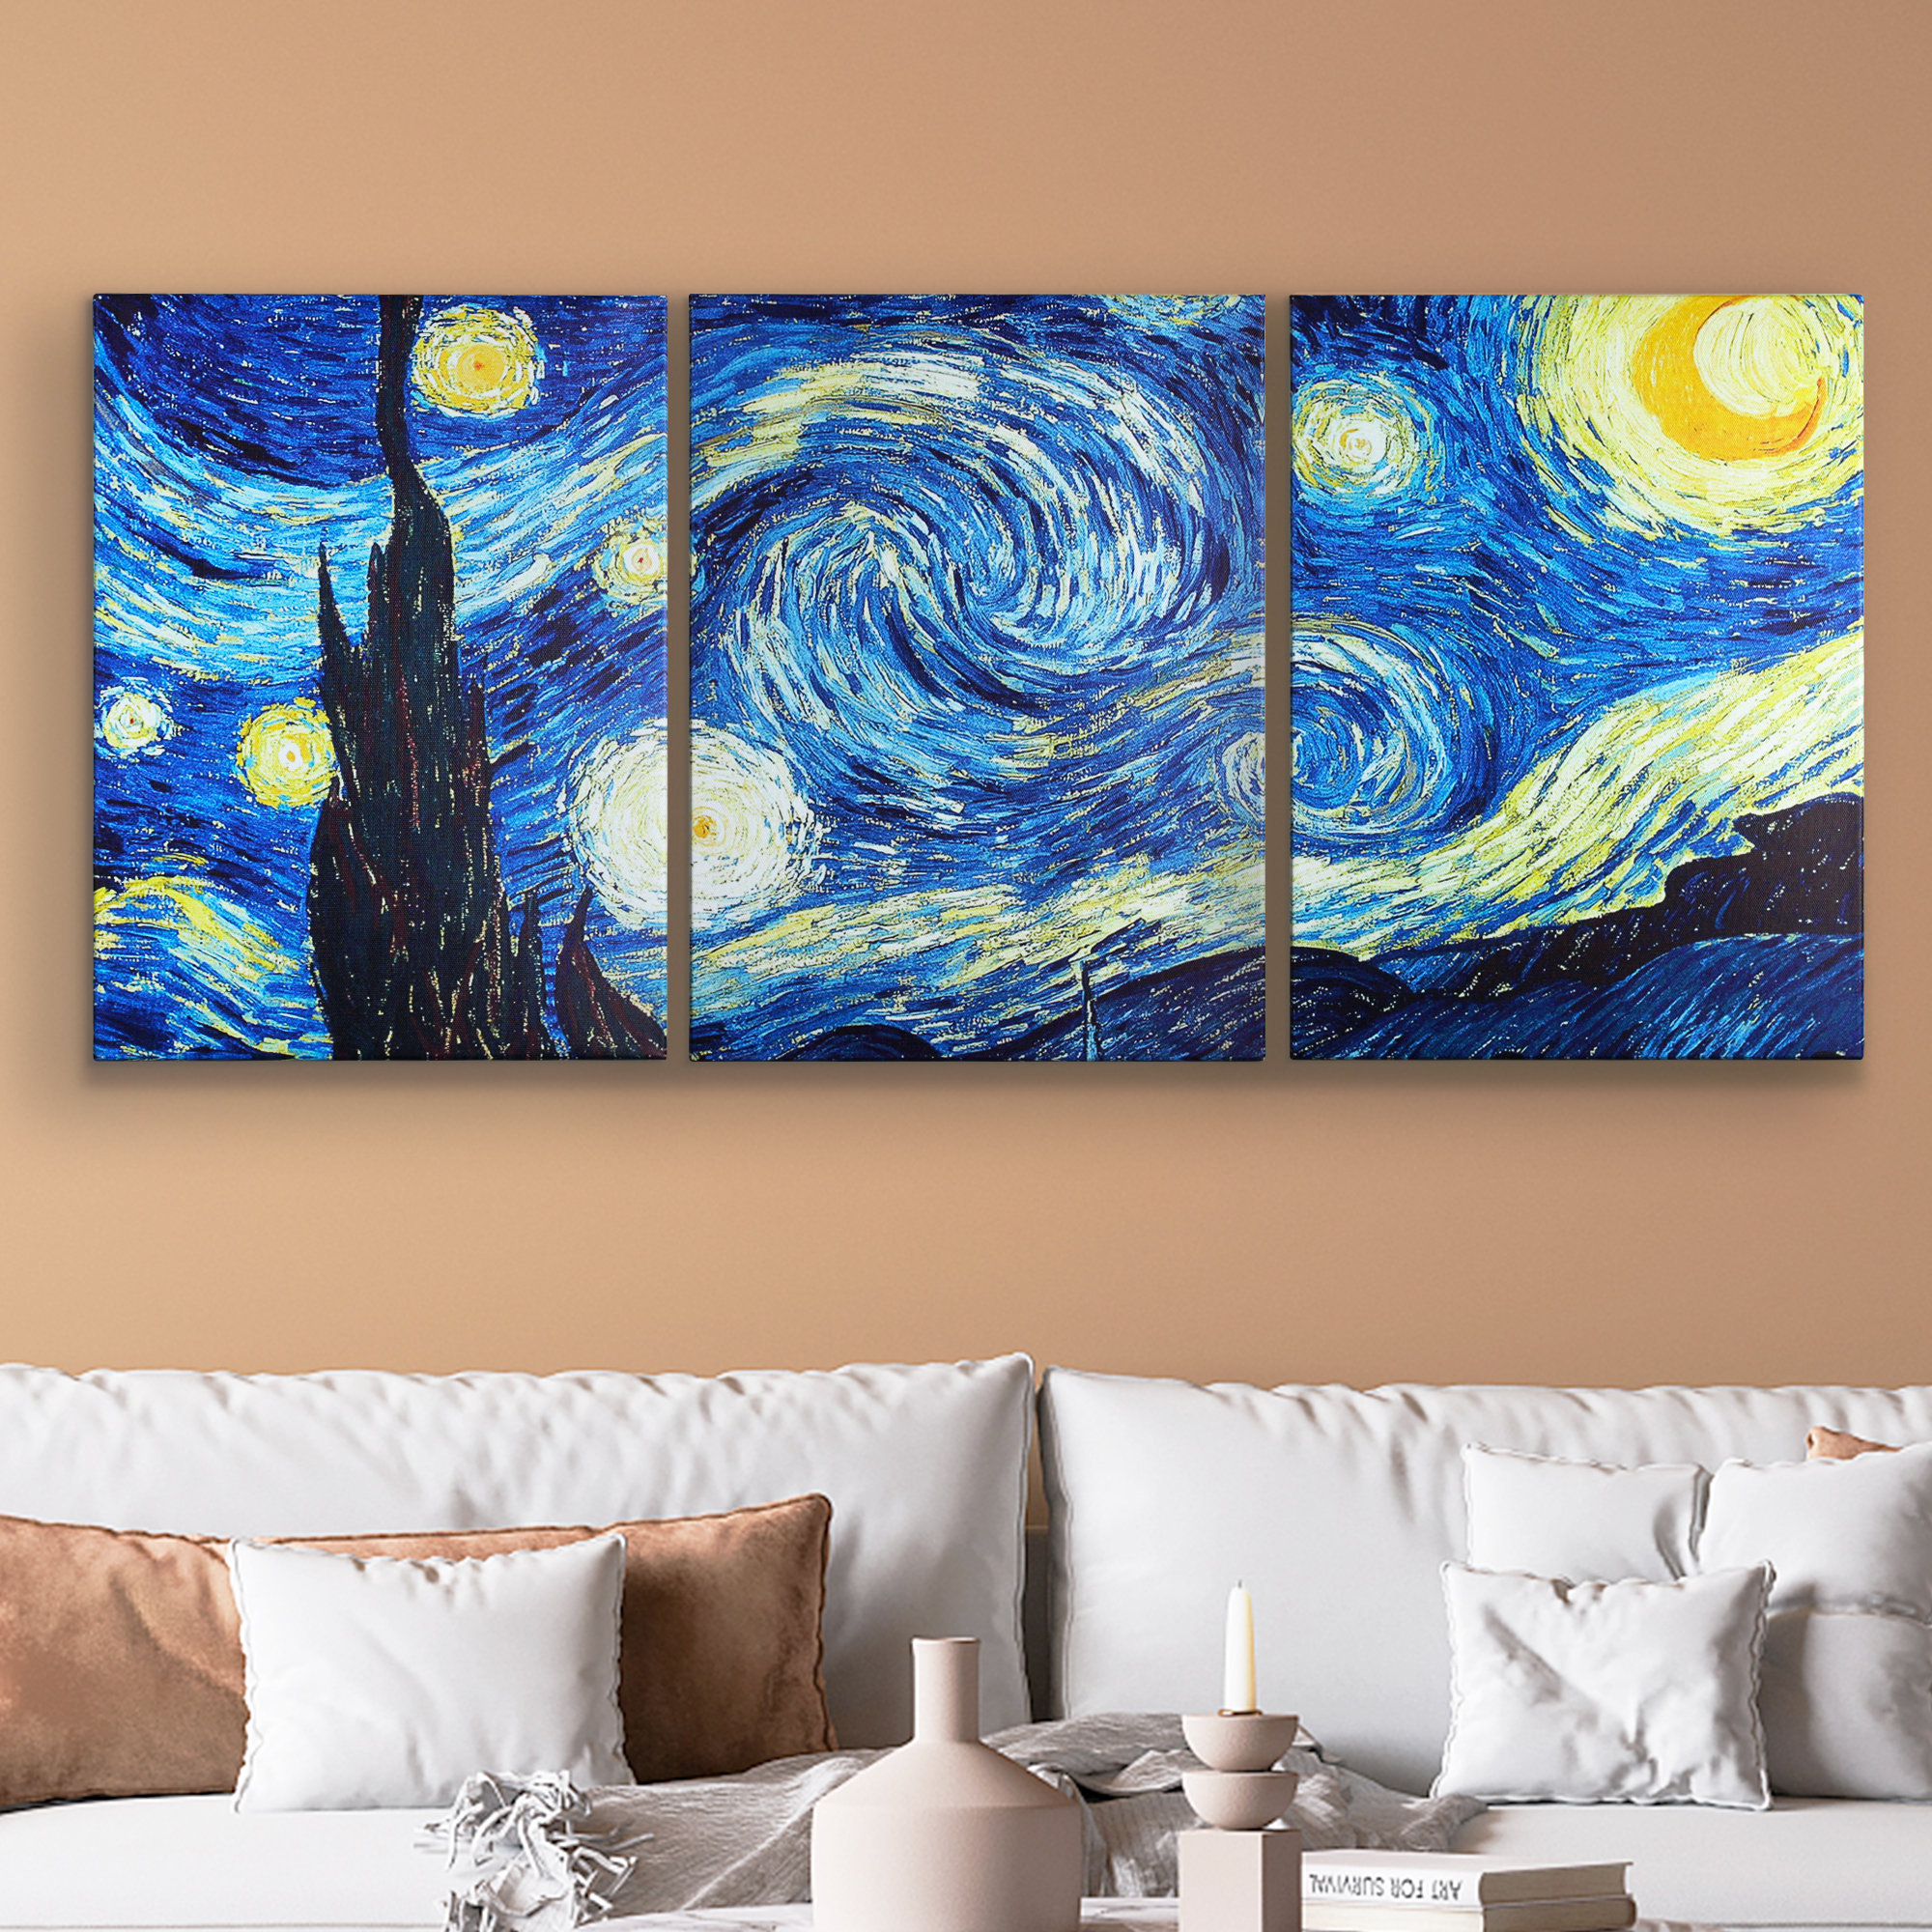 5 Panel Wall Art Canvas Set Abstract Starry Night Picture By Van